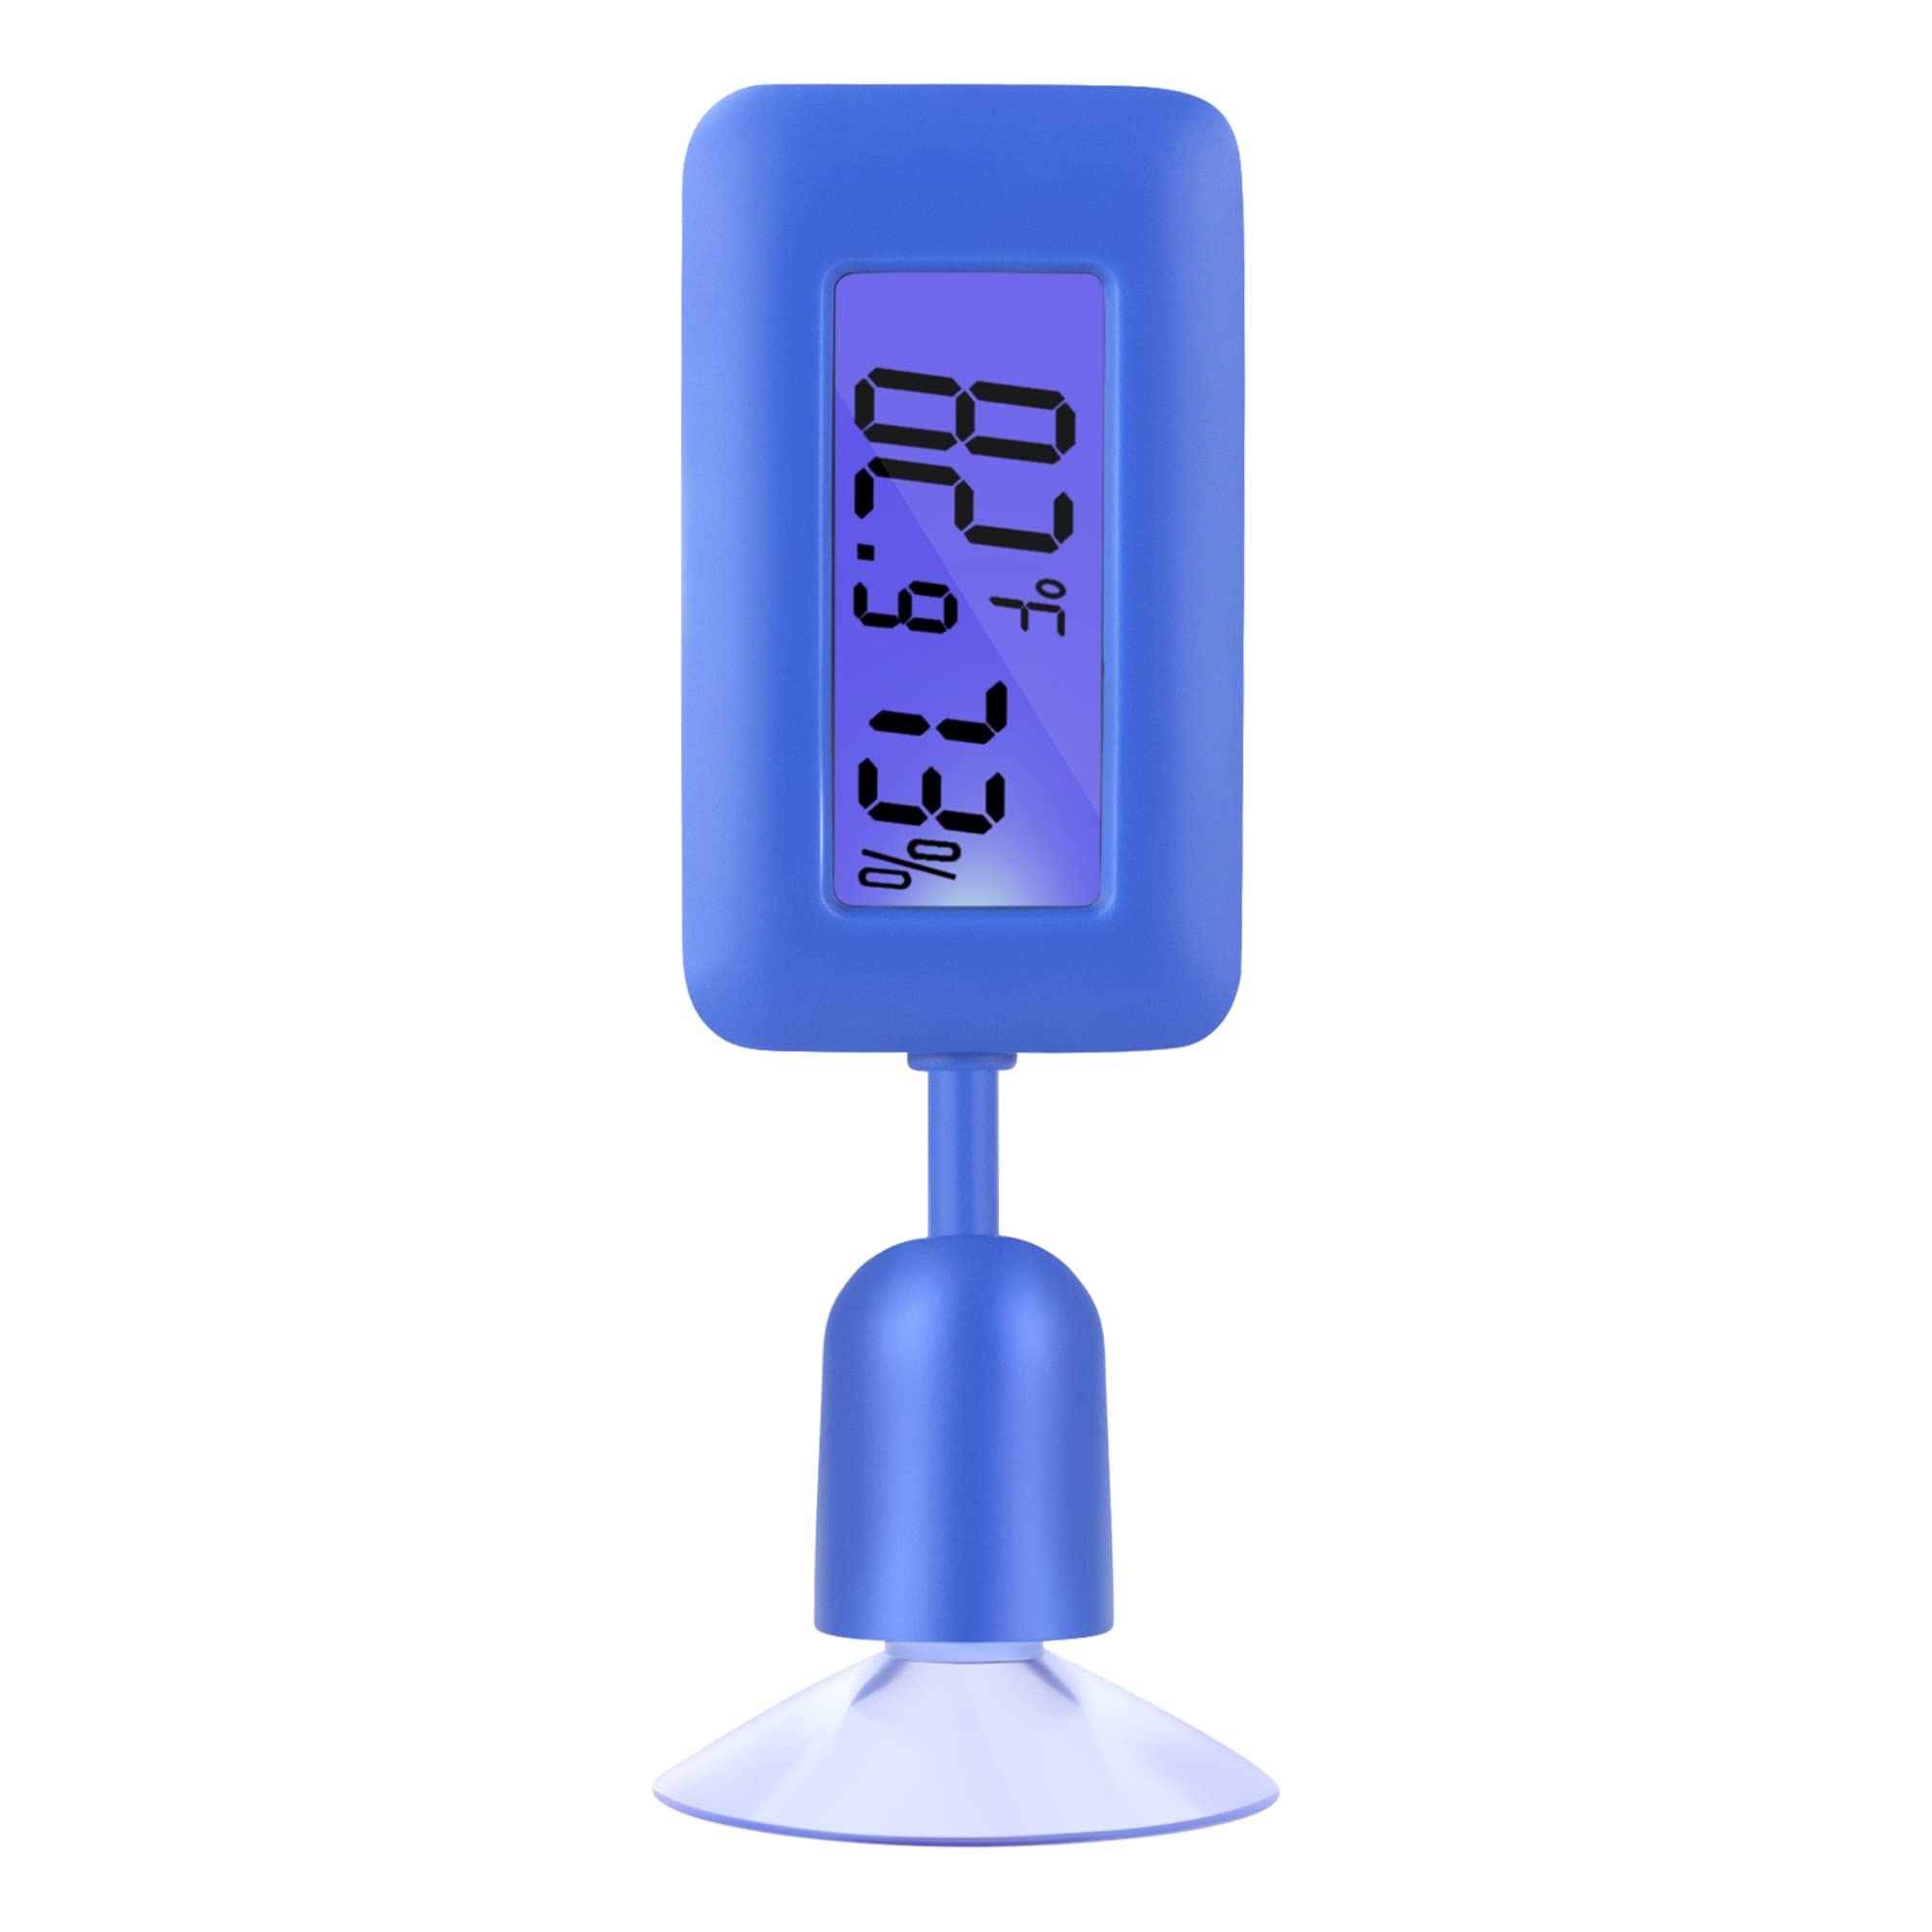 Reptile Thermometer,Reptile Thermometer and Humidity Gauge,Digital Reptile  Thermometer and Hygrometer